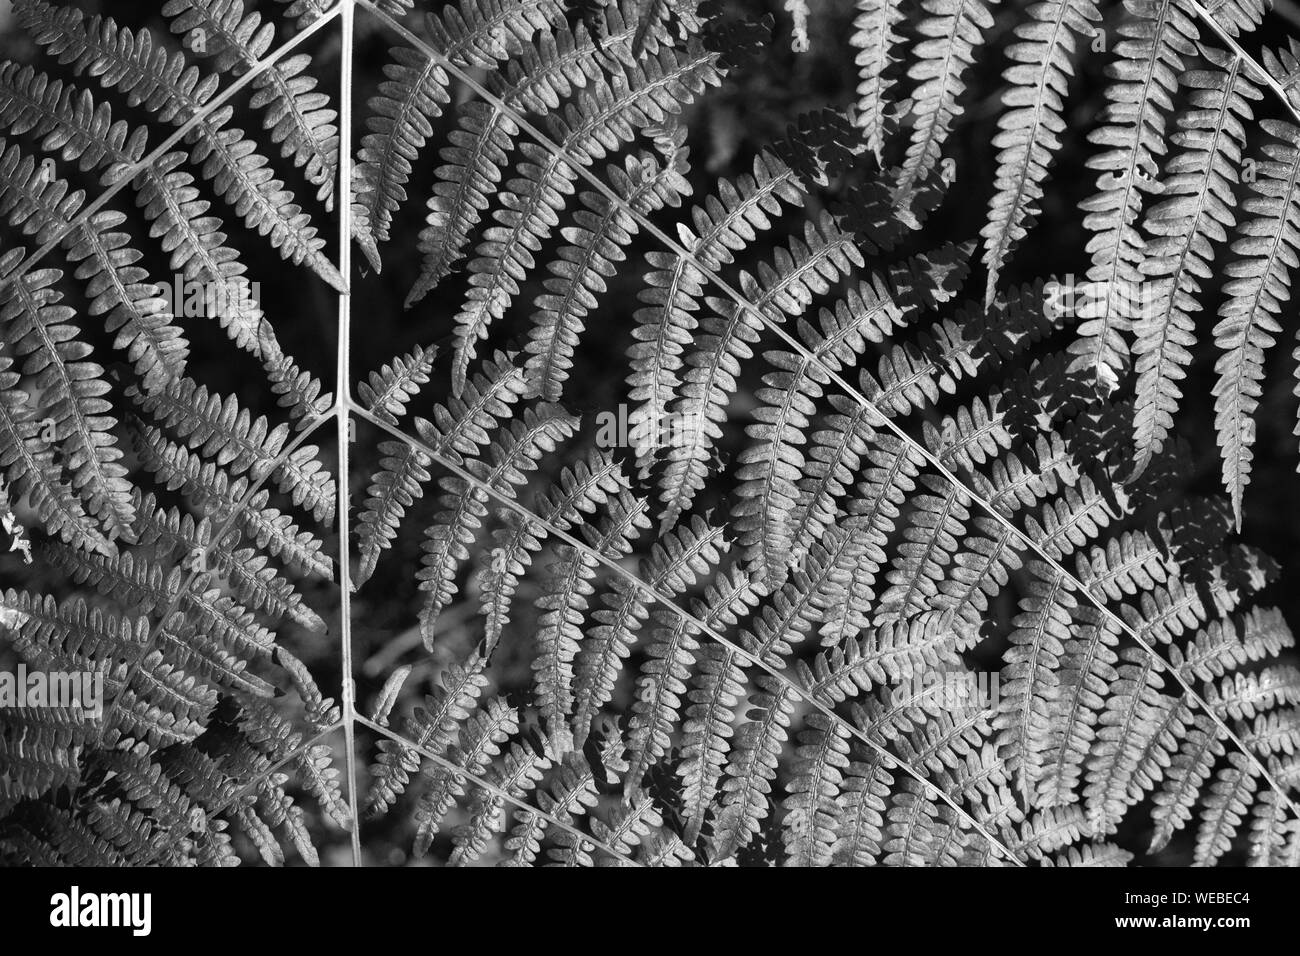 close up of fern leaves natural background in black and white Stock Photo